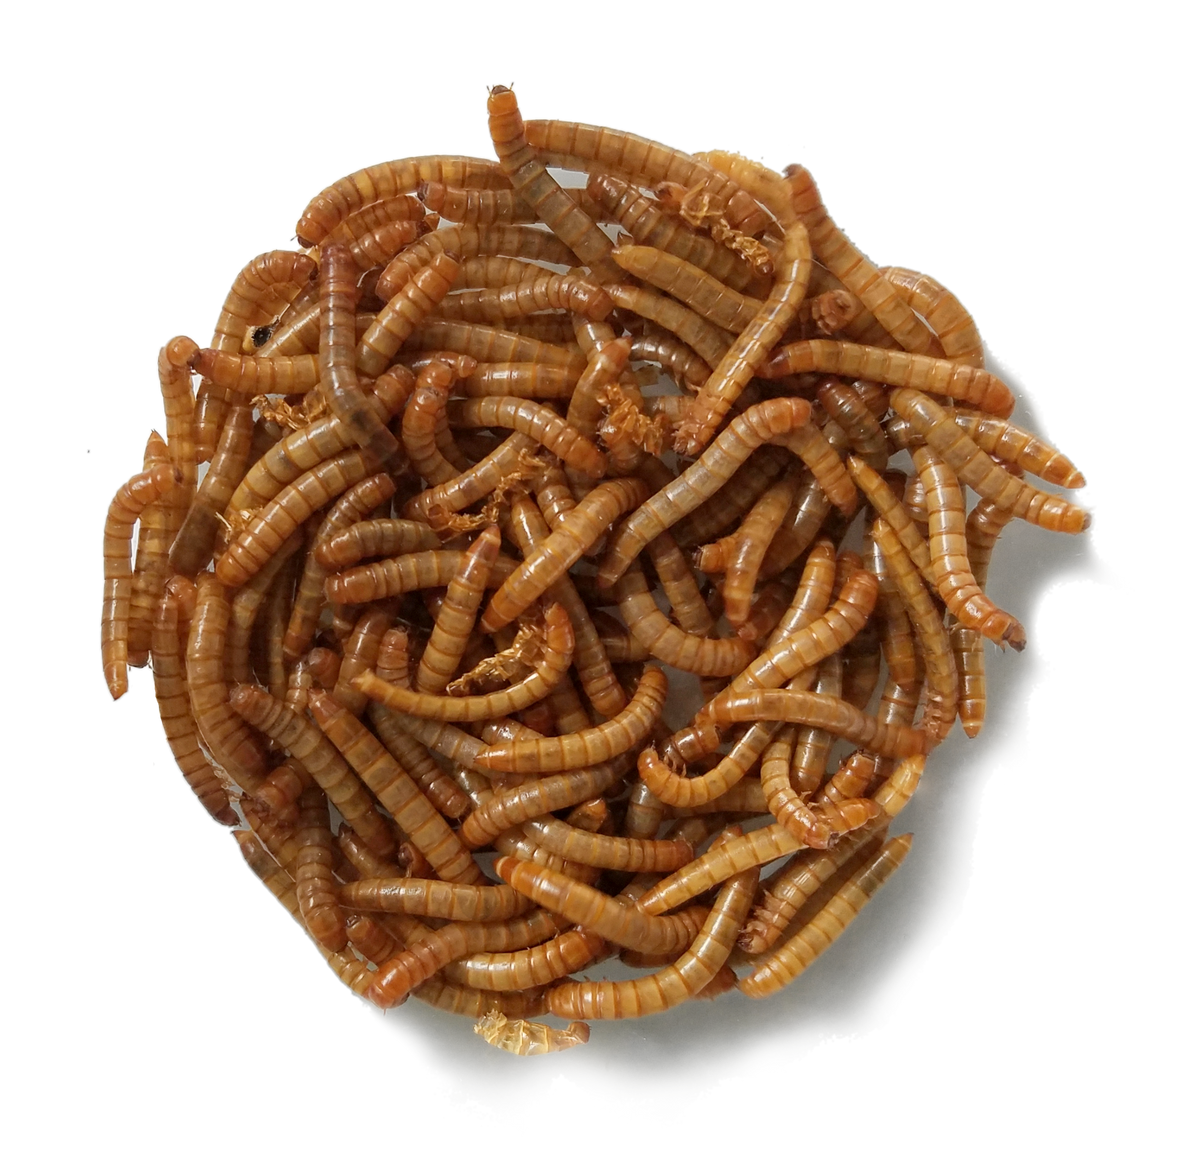 Live Mealworms (Large) – Kettle Moraine Woodworking Inc